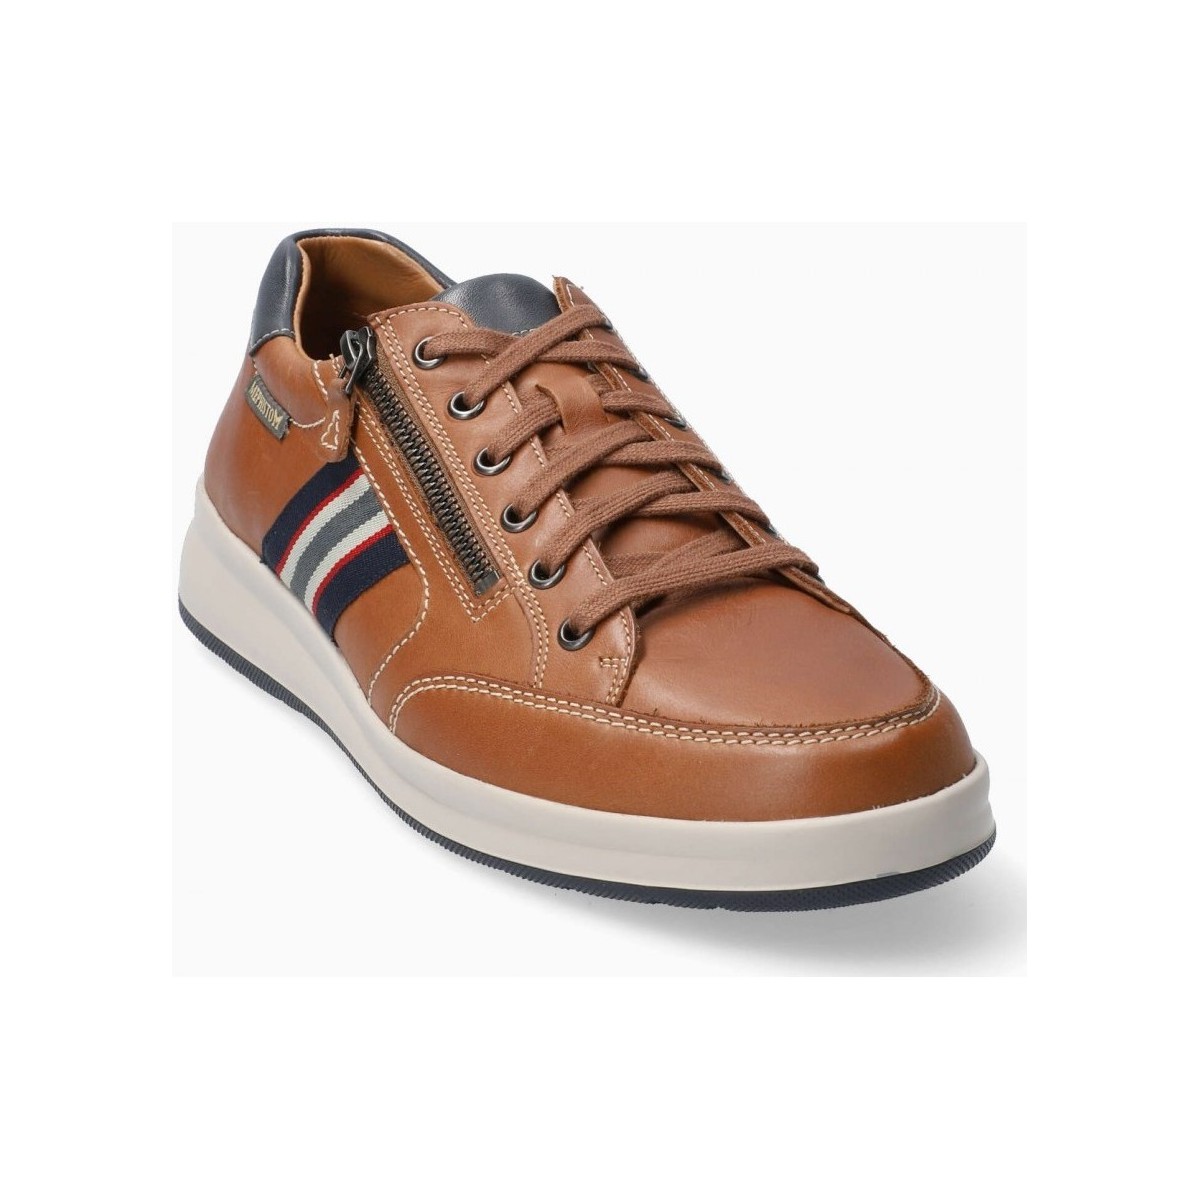 Chaussures Homme Baskets mode Mephisto Baskets en cuir LISANDRO Marron